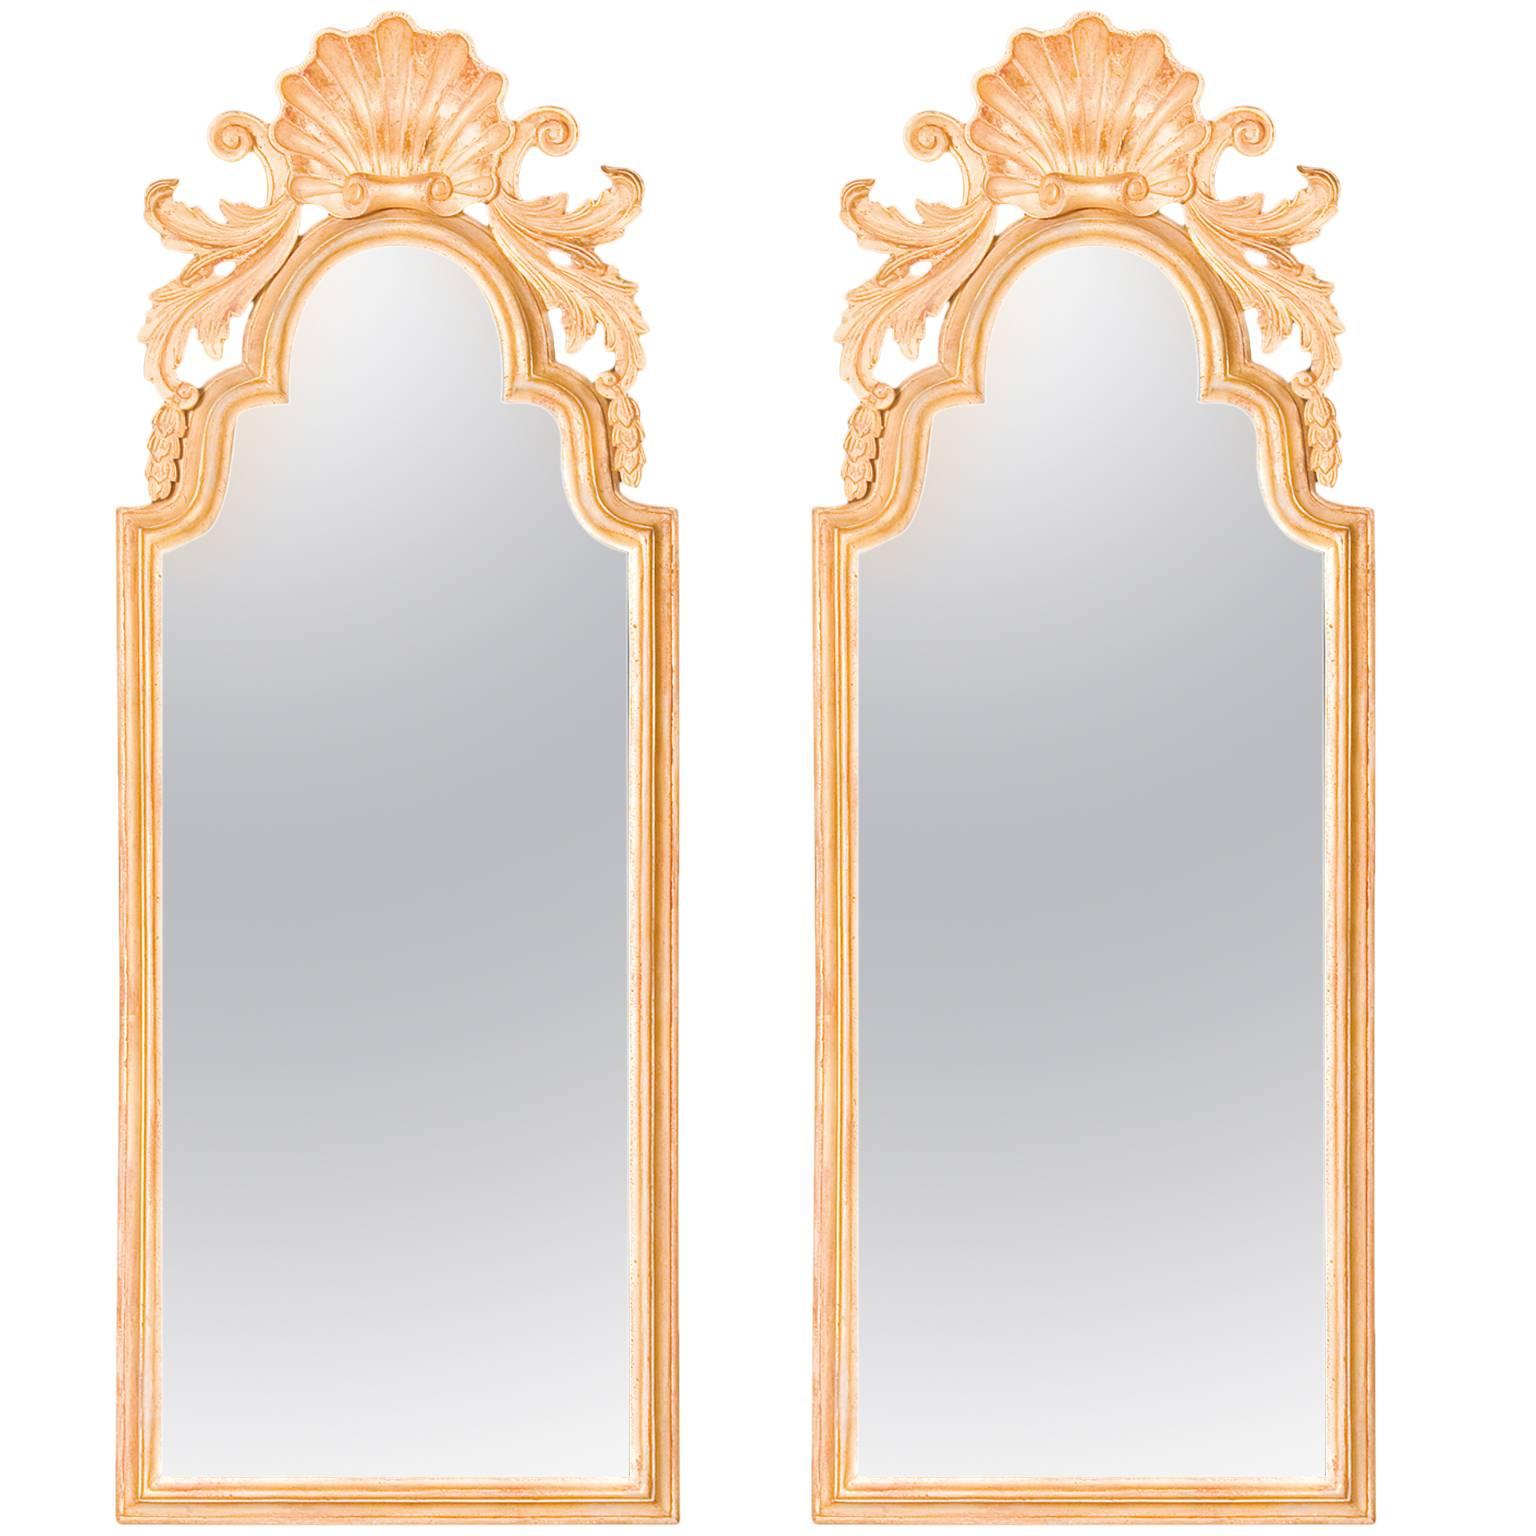 Pier Glass Mirrors in the Queen Anne manner